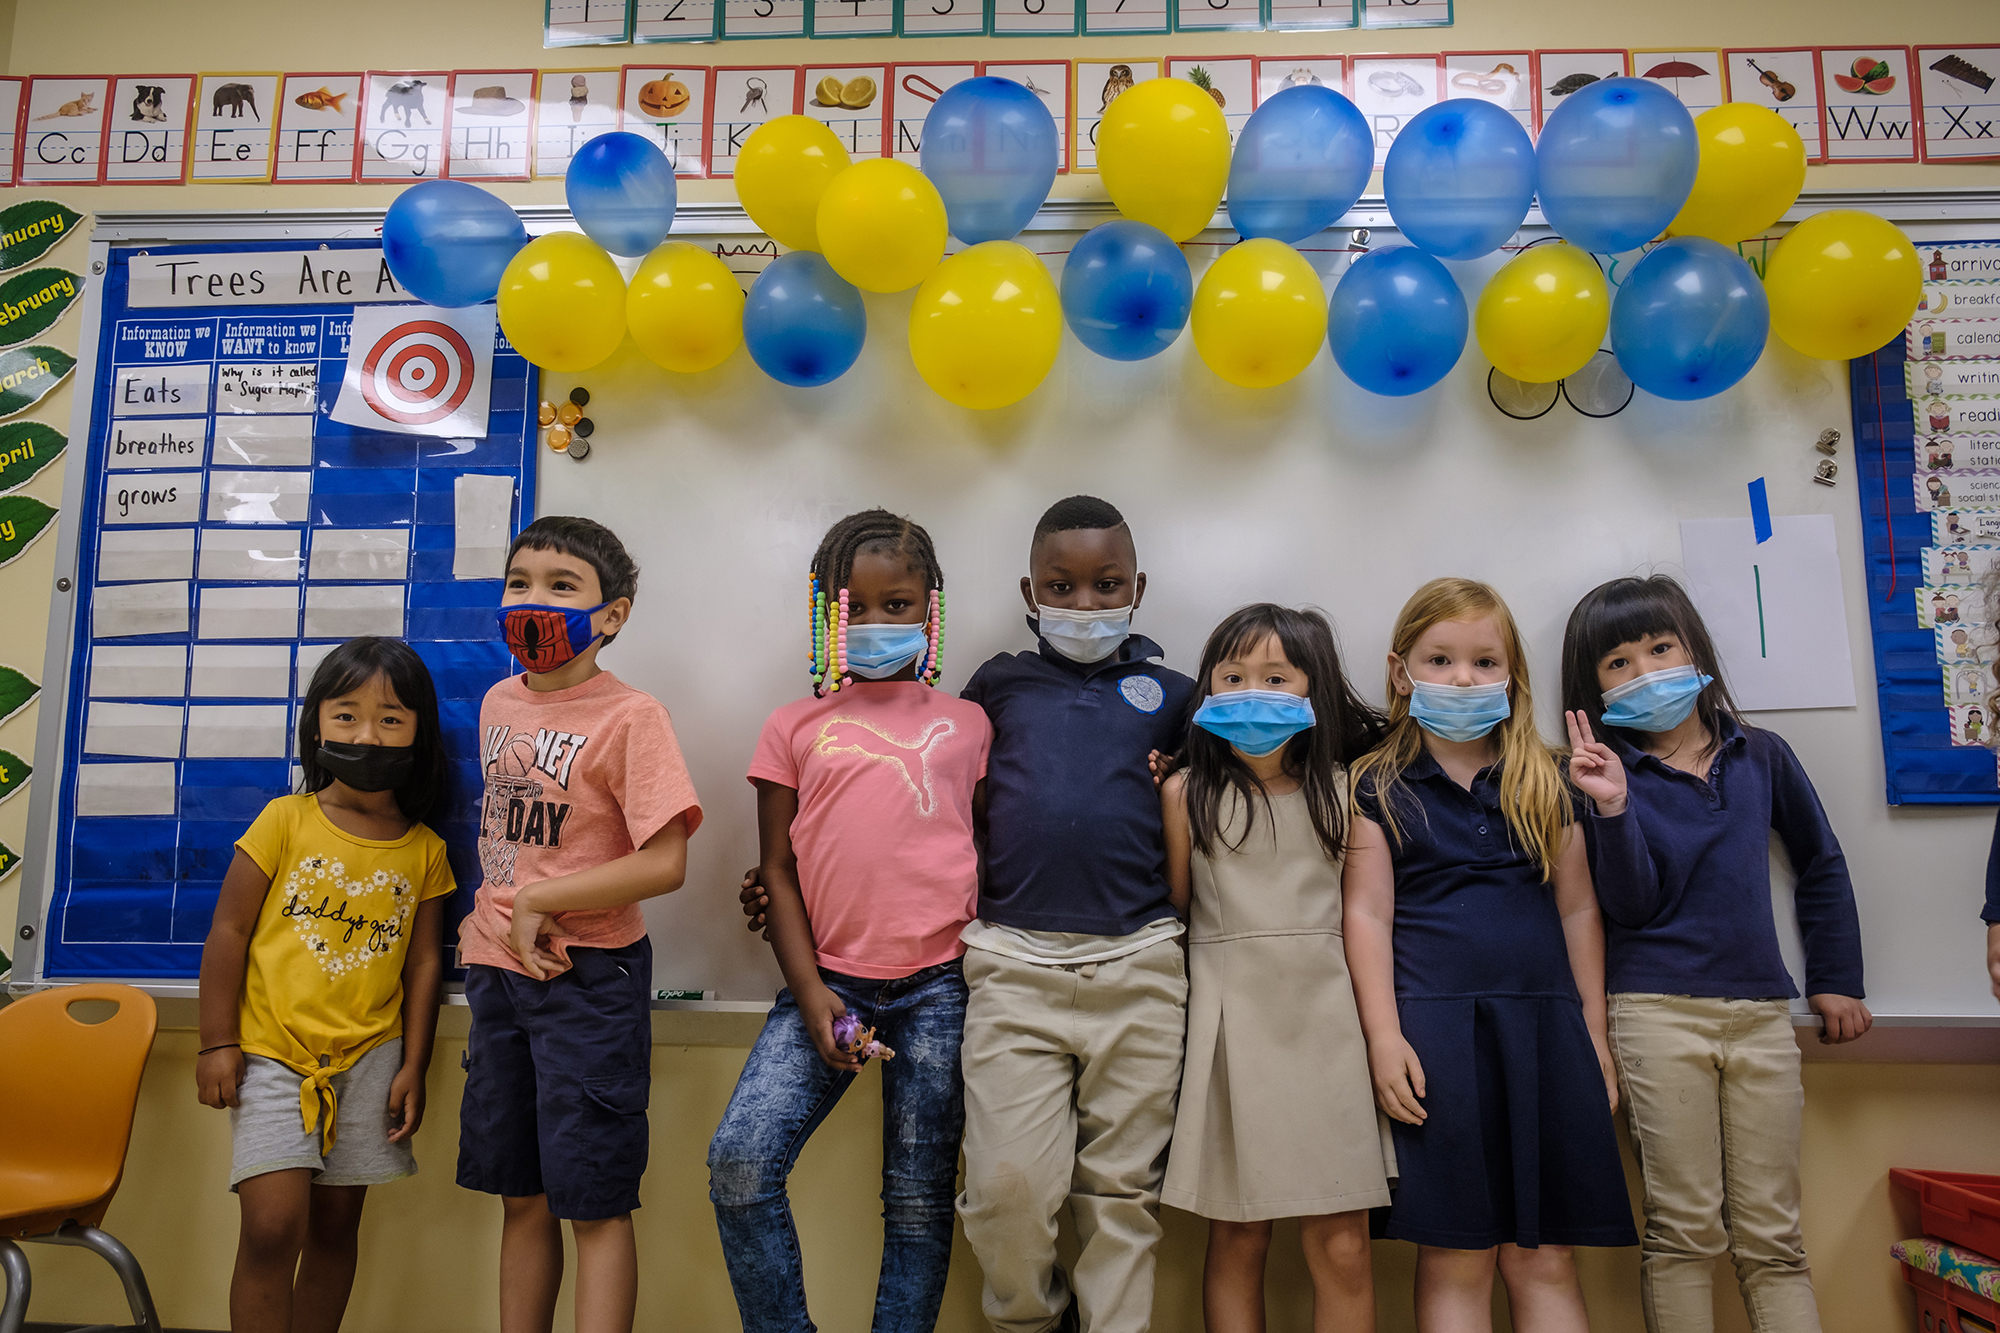 group of kids with masks on in a classroom standing in front of the white board